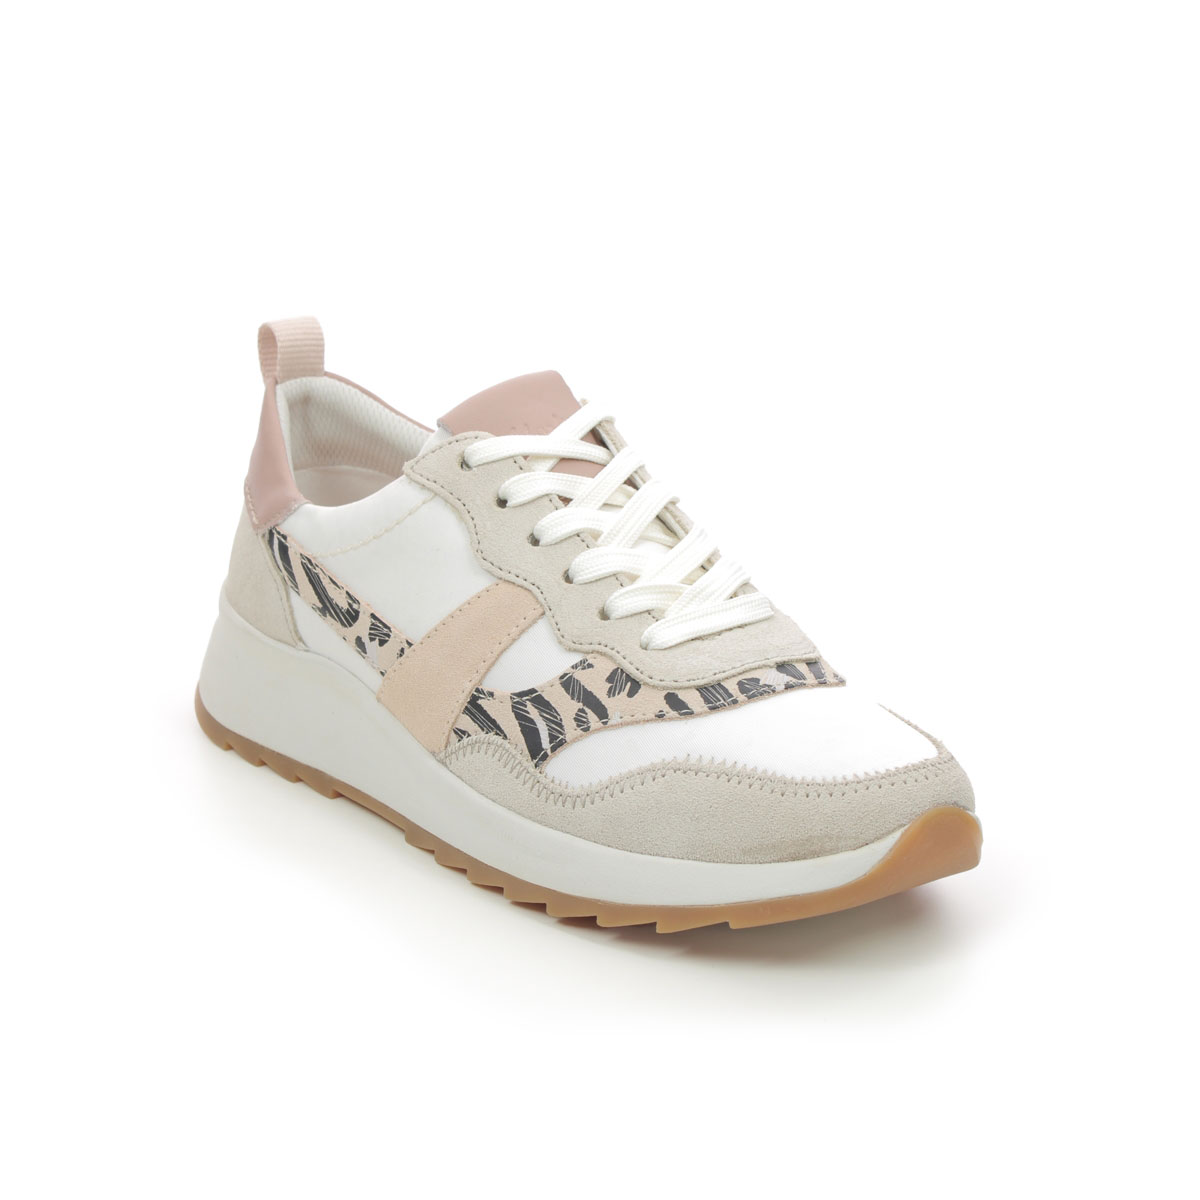 Clarks Dashlite Jazz White Pink Womens Trainers 704294D In Size 4 In Plain White Pink